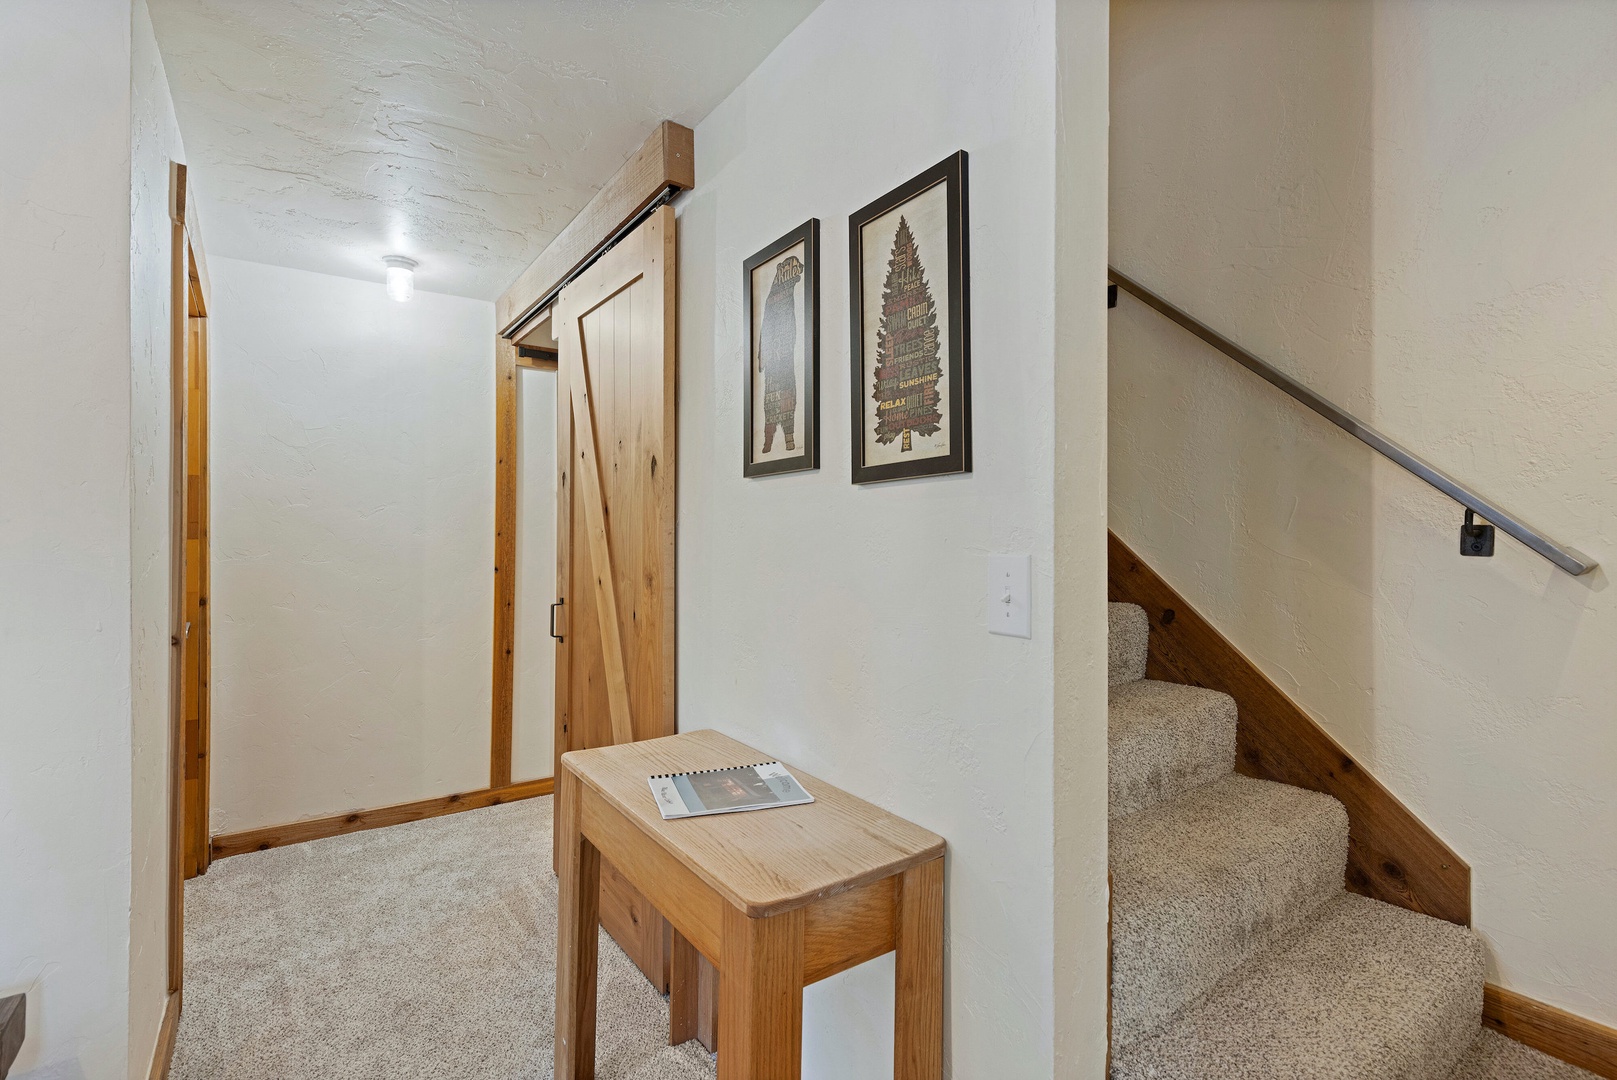 Head downstairs to the lower level to find an additional bedroom & bathroom